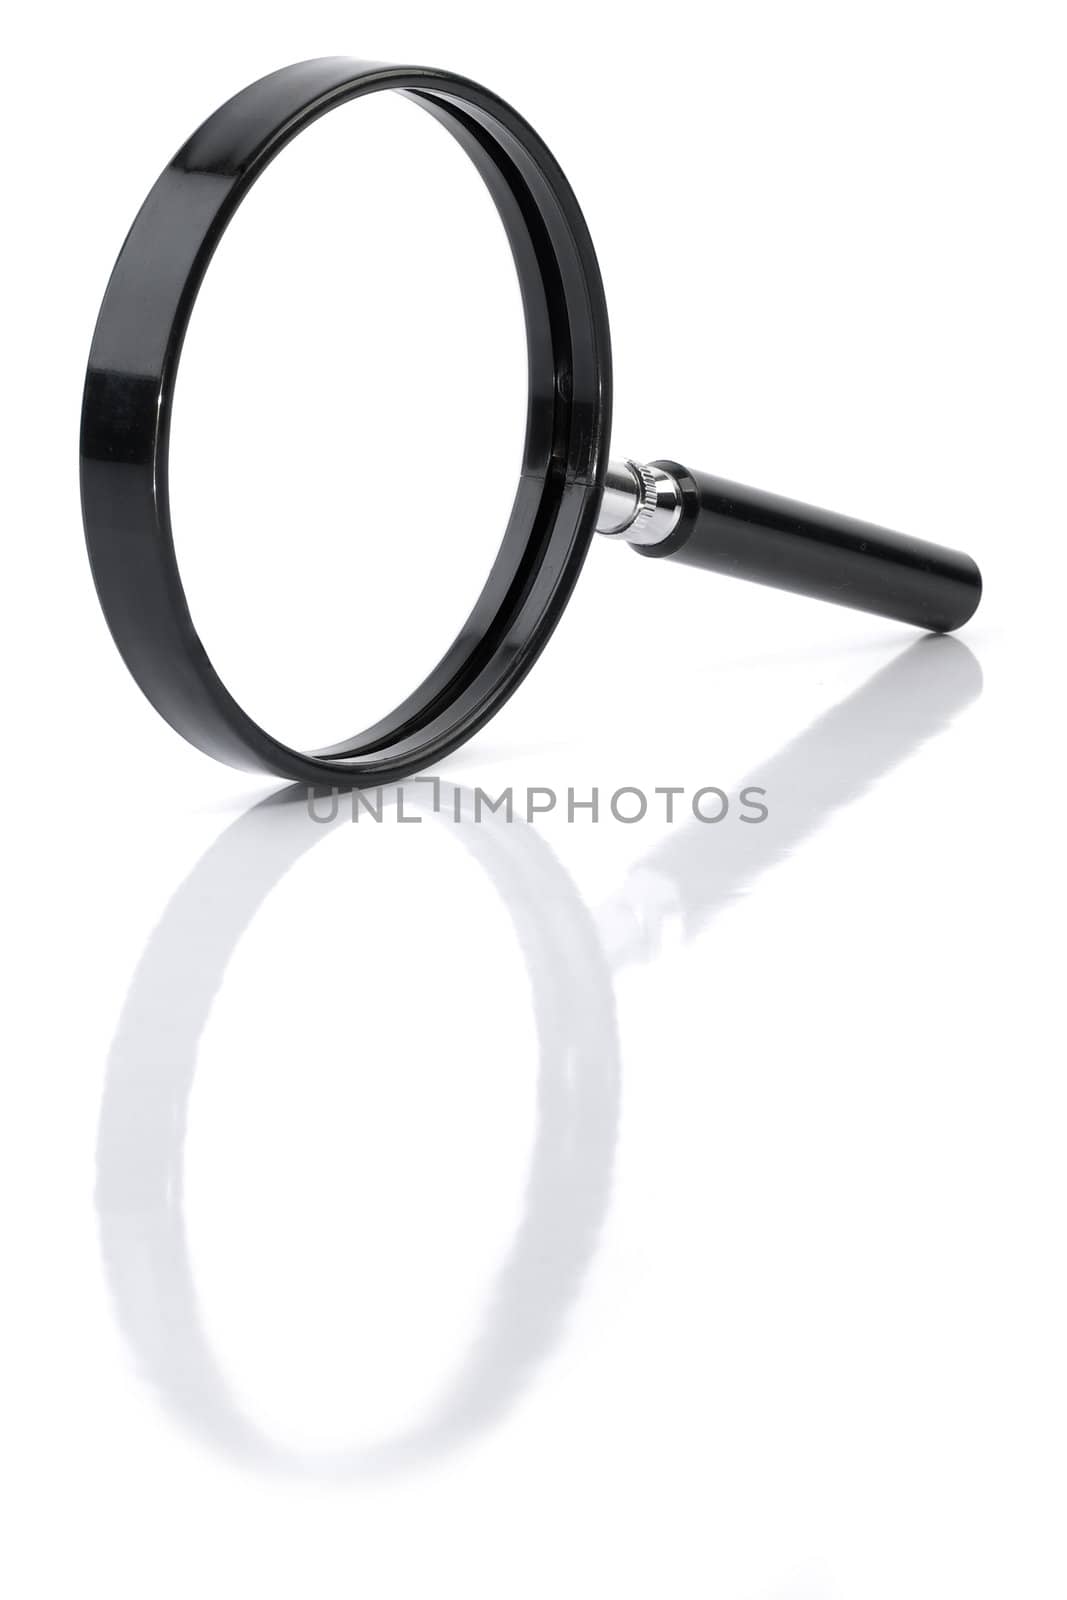 Magnifying glass with reflect on white background.